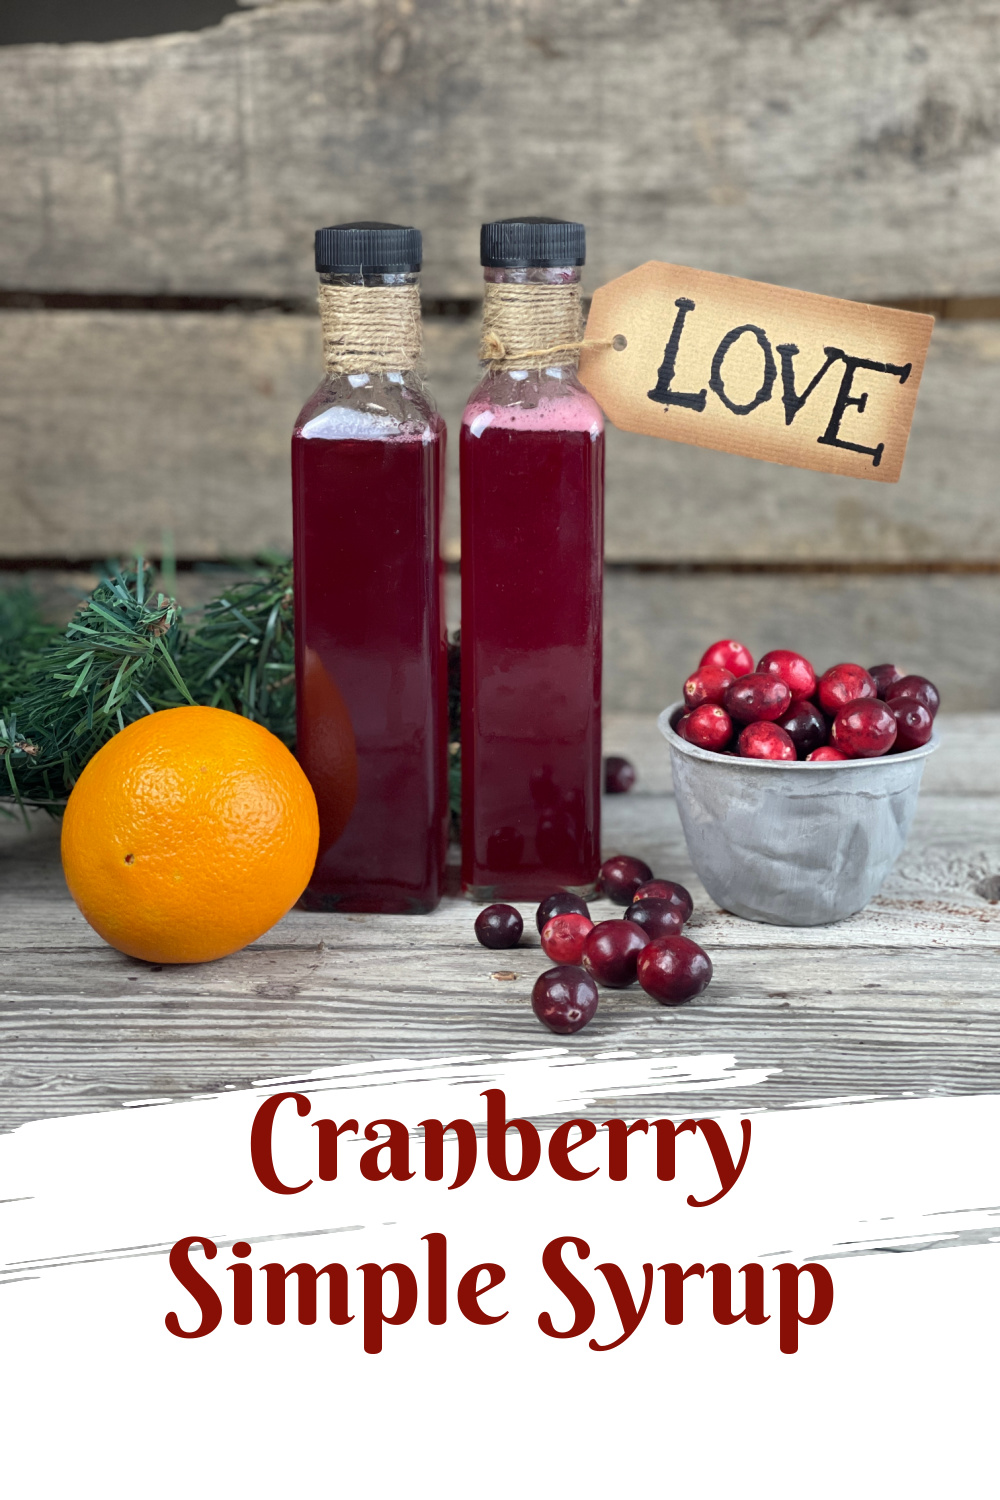 Easy Homemade Cranberry Simply Syrup from Farmwife Feeds, 3 ingredients make a great hostess gift or a holiday treat in cocktails, coffee and hot chocolate. #simplesyrup #cocktails #cranberry